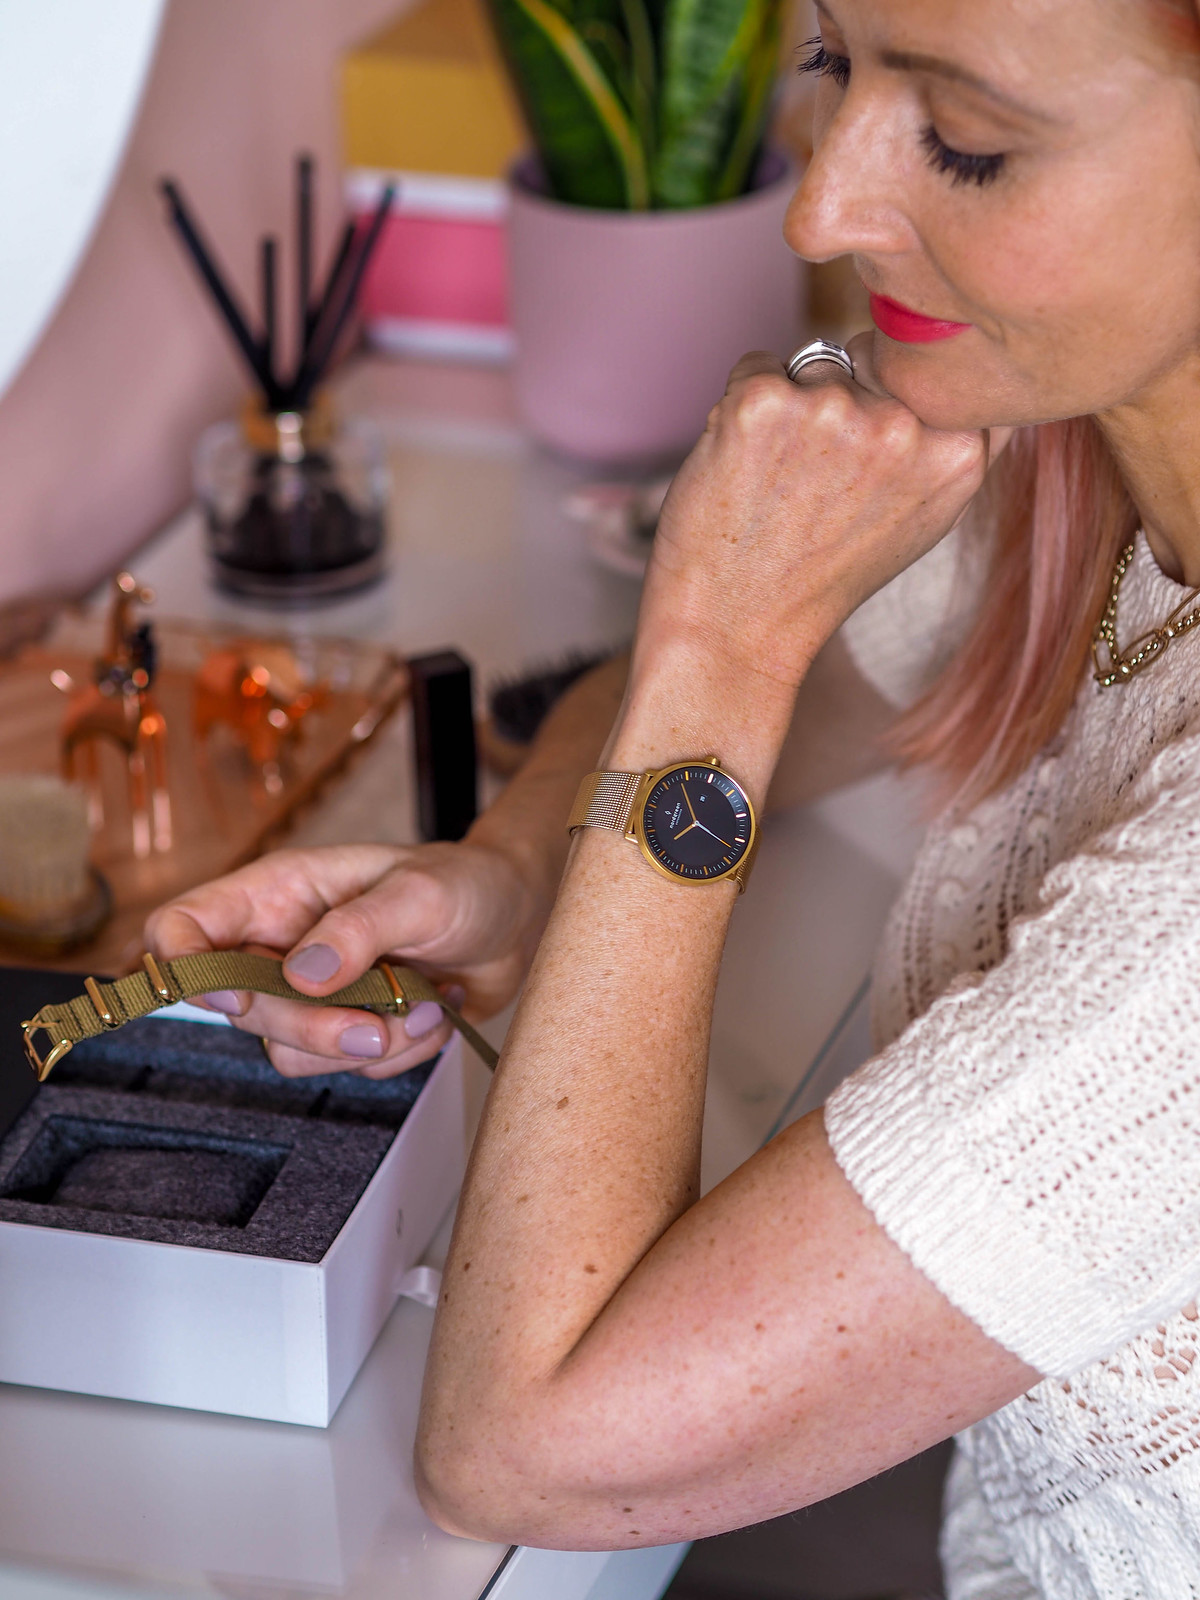 A Classic Black and Gold Watch With Ethical, Sustainable Credentials (Catherine Summers AKA Not Dressed As Lamb is sitting at her dressing table showing off her Nordgreen watch)